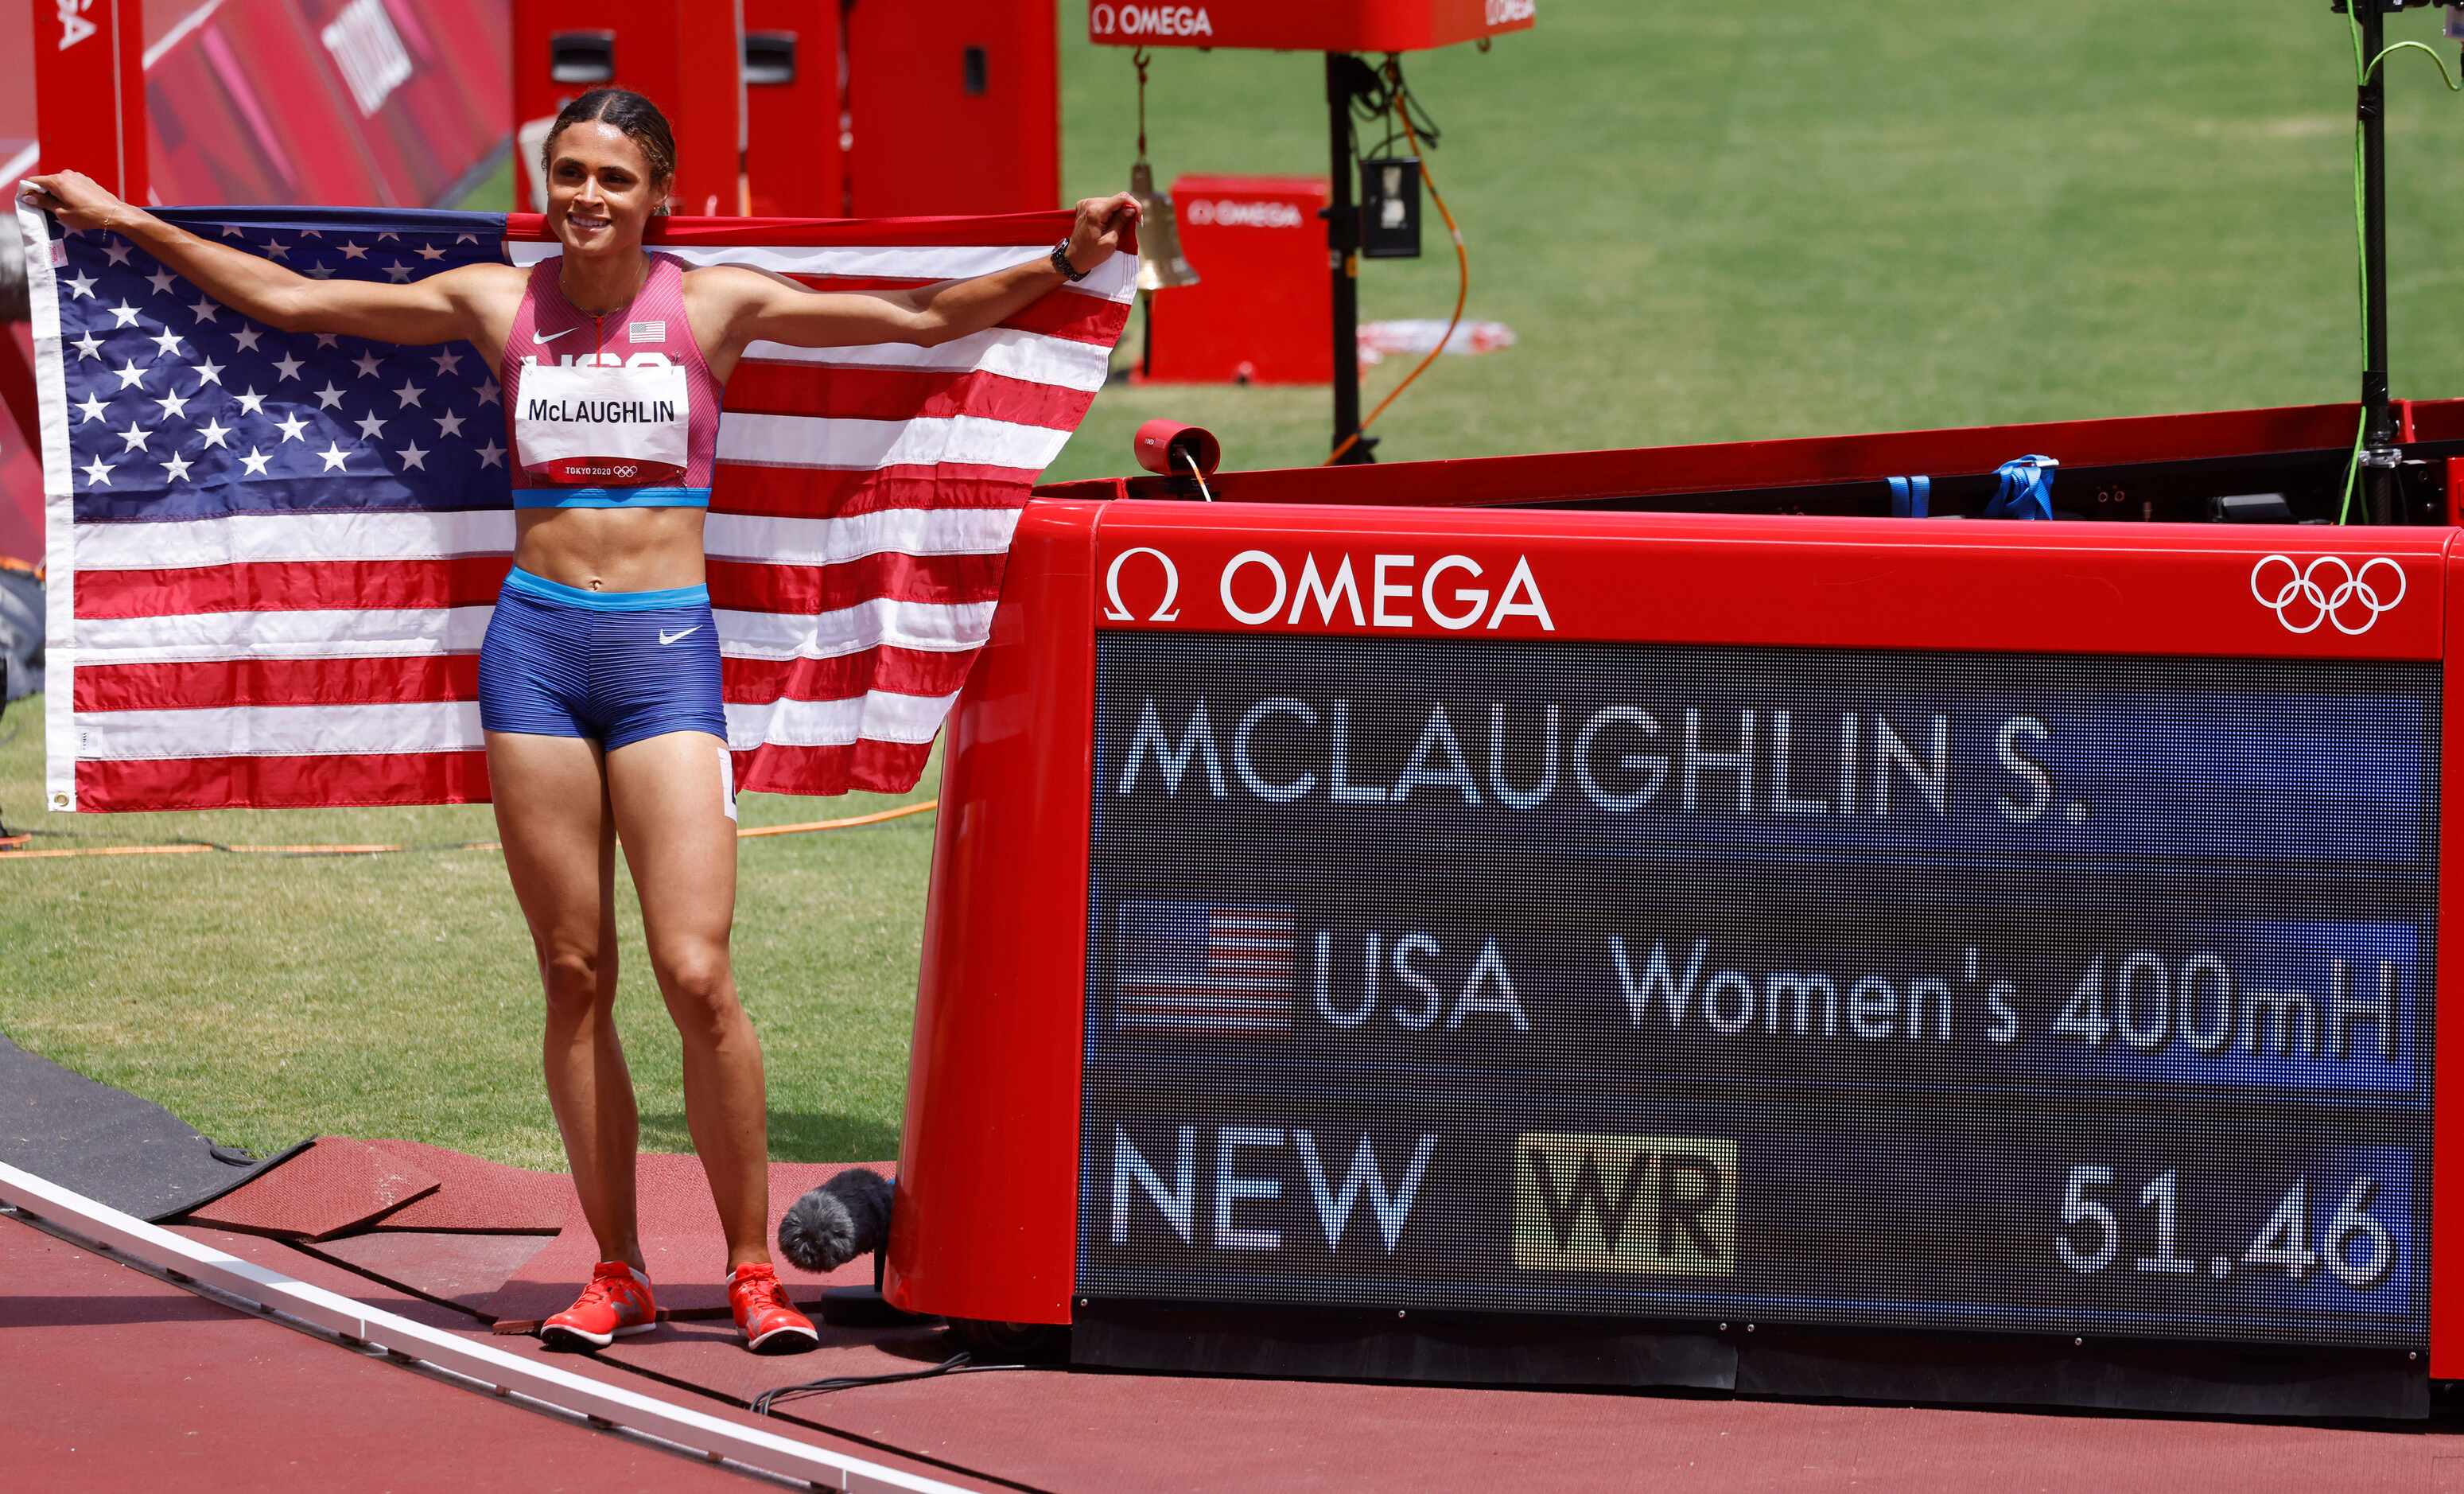 USA’s Sydney McLaughlin poses next to her world record time displayed across the screen...